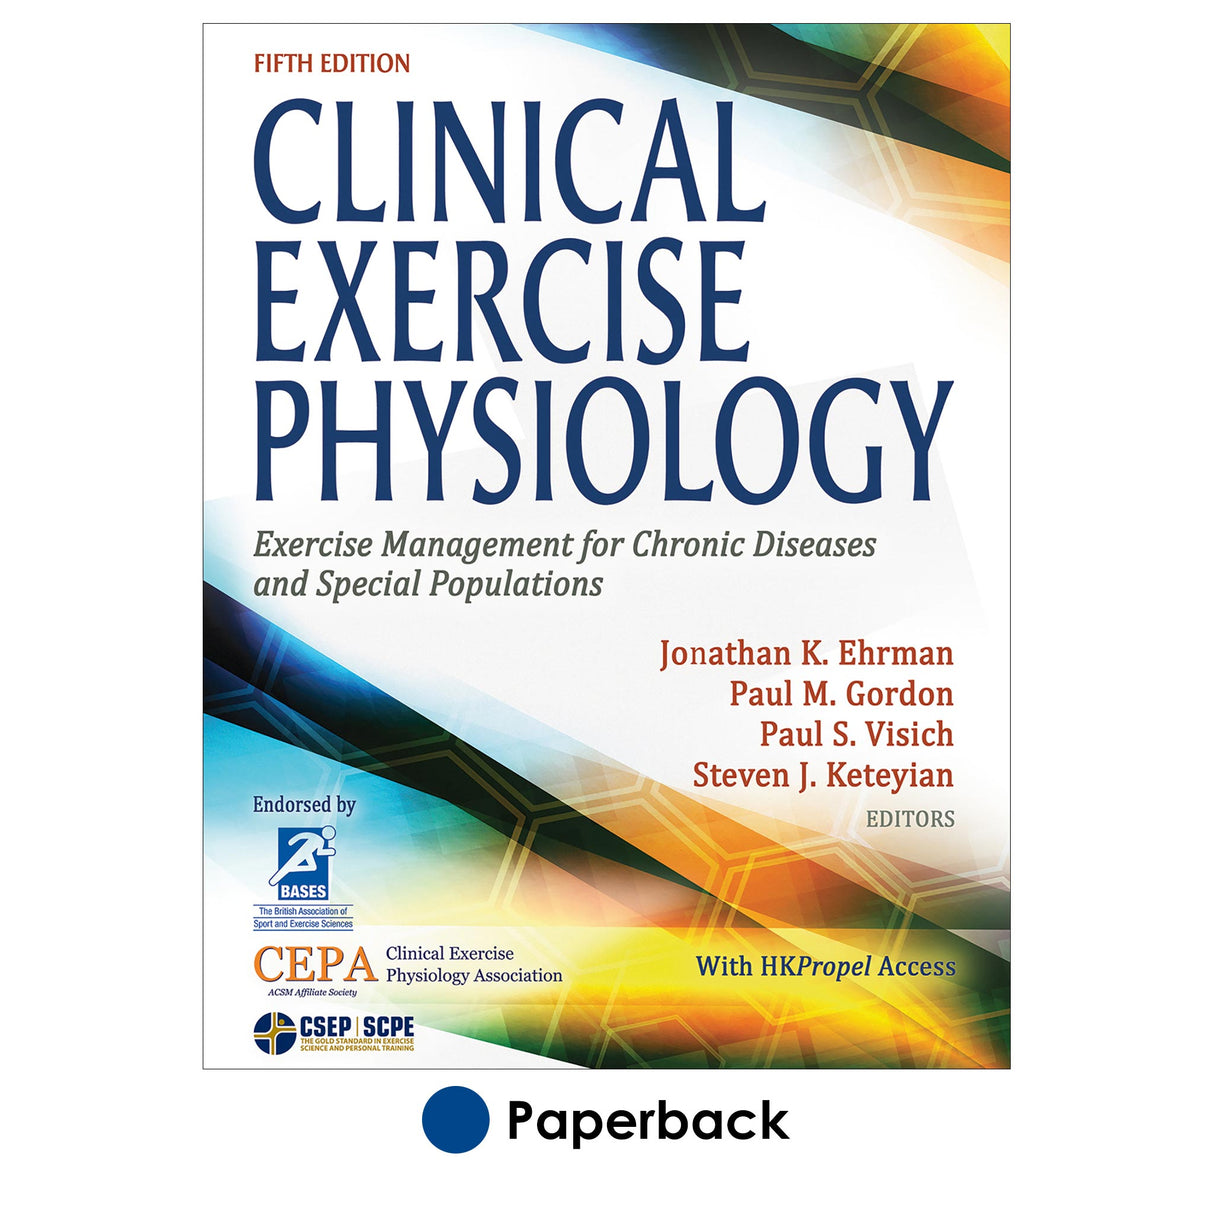 Clinical Exercise Physiology 5th Edition With HKPropel Access